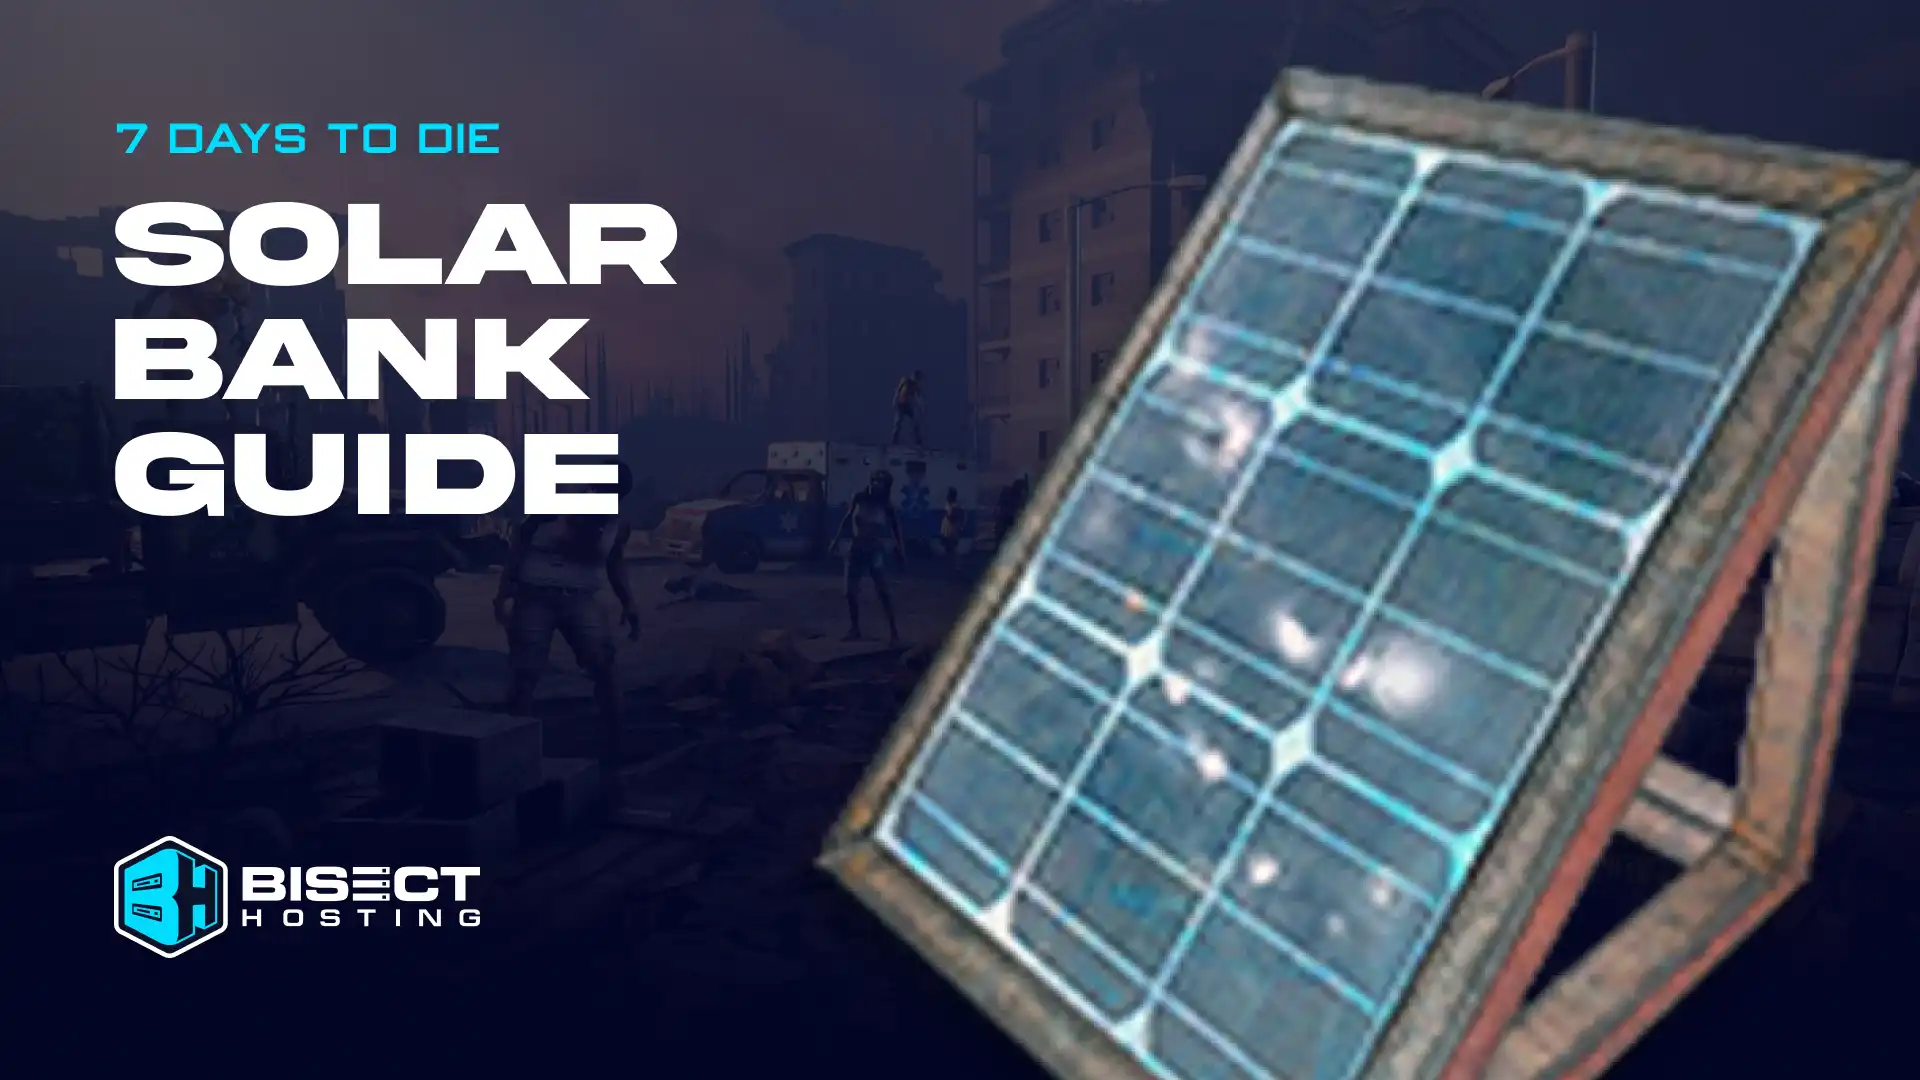 How to Build a Solar Bank in 7 Days to Die